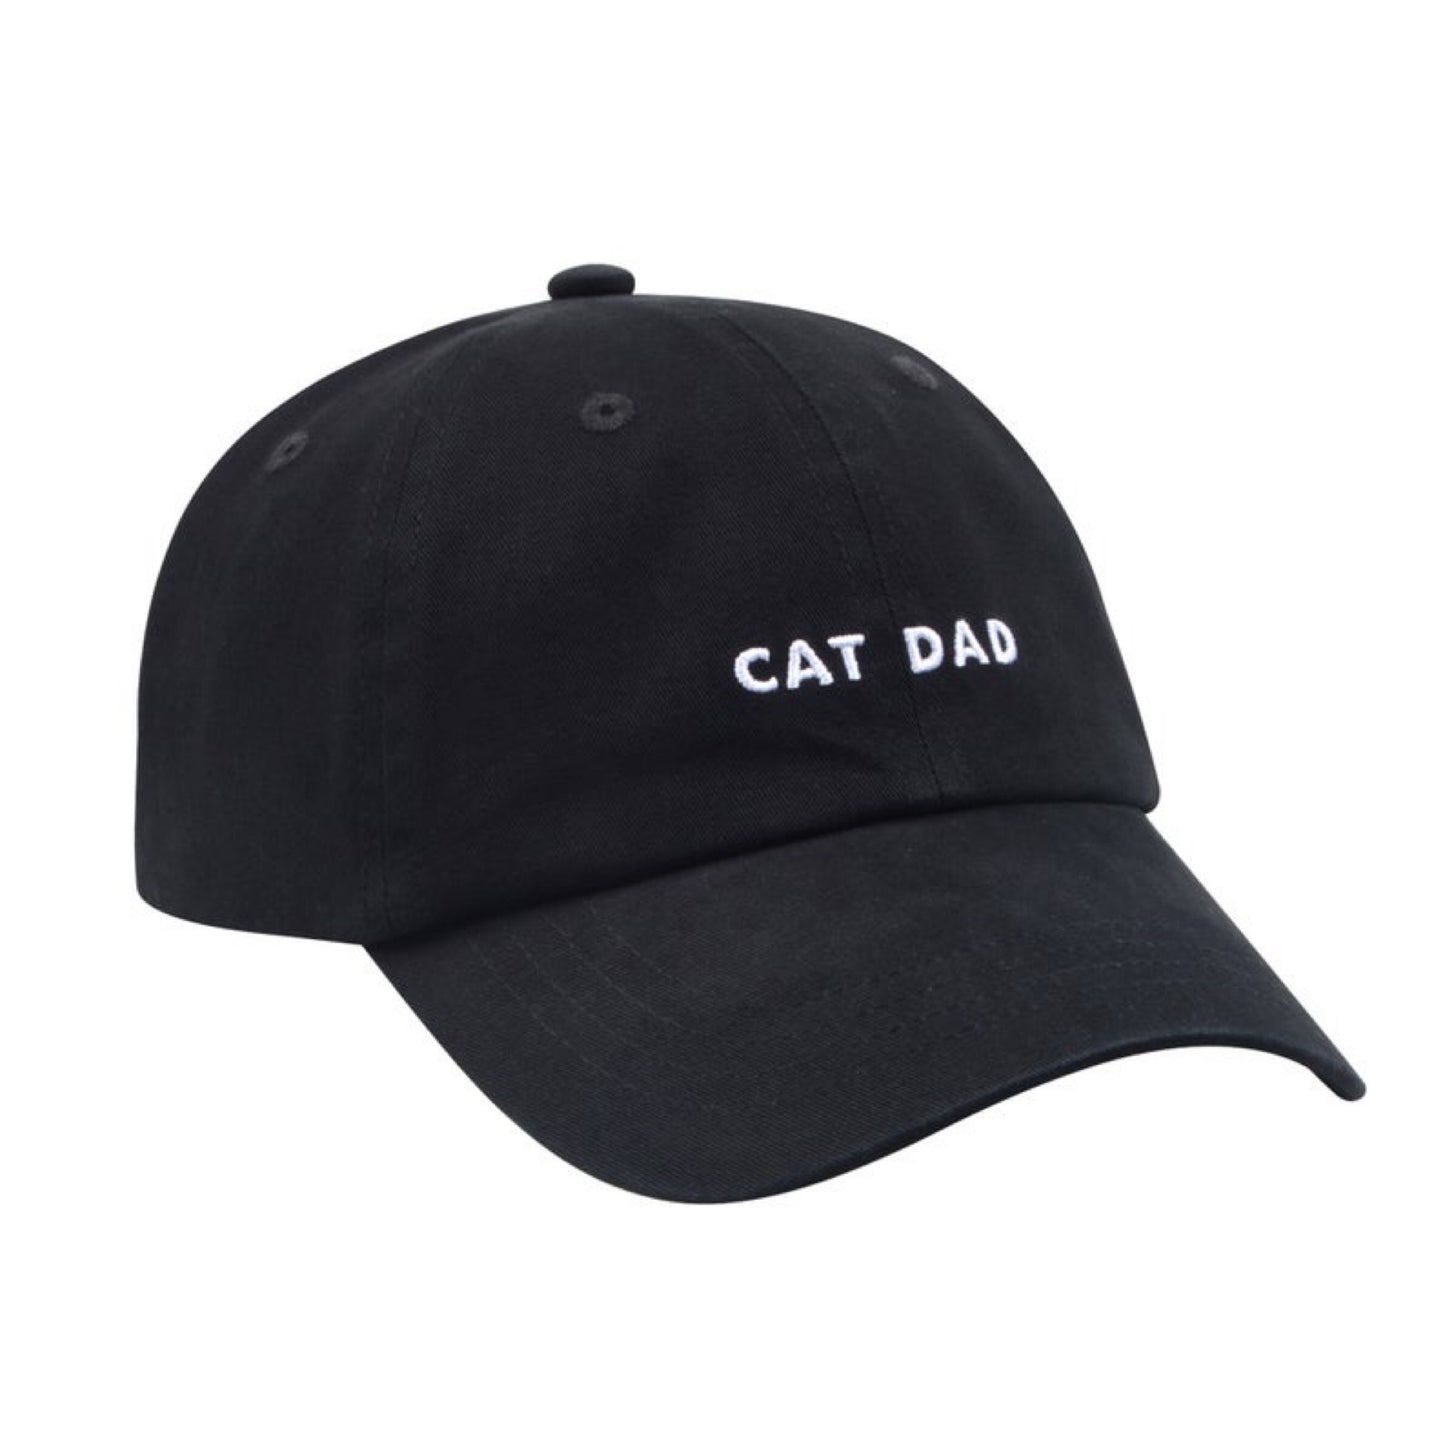 Cat Dad Embroidered Baseball Cap